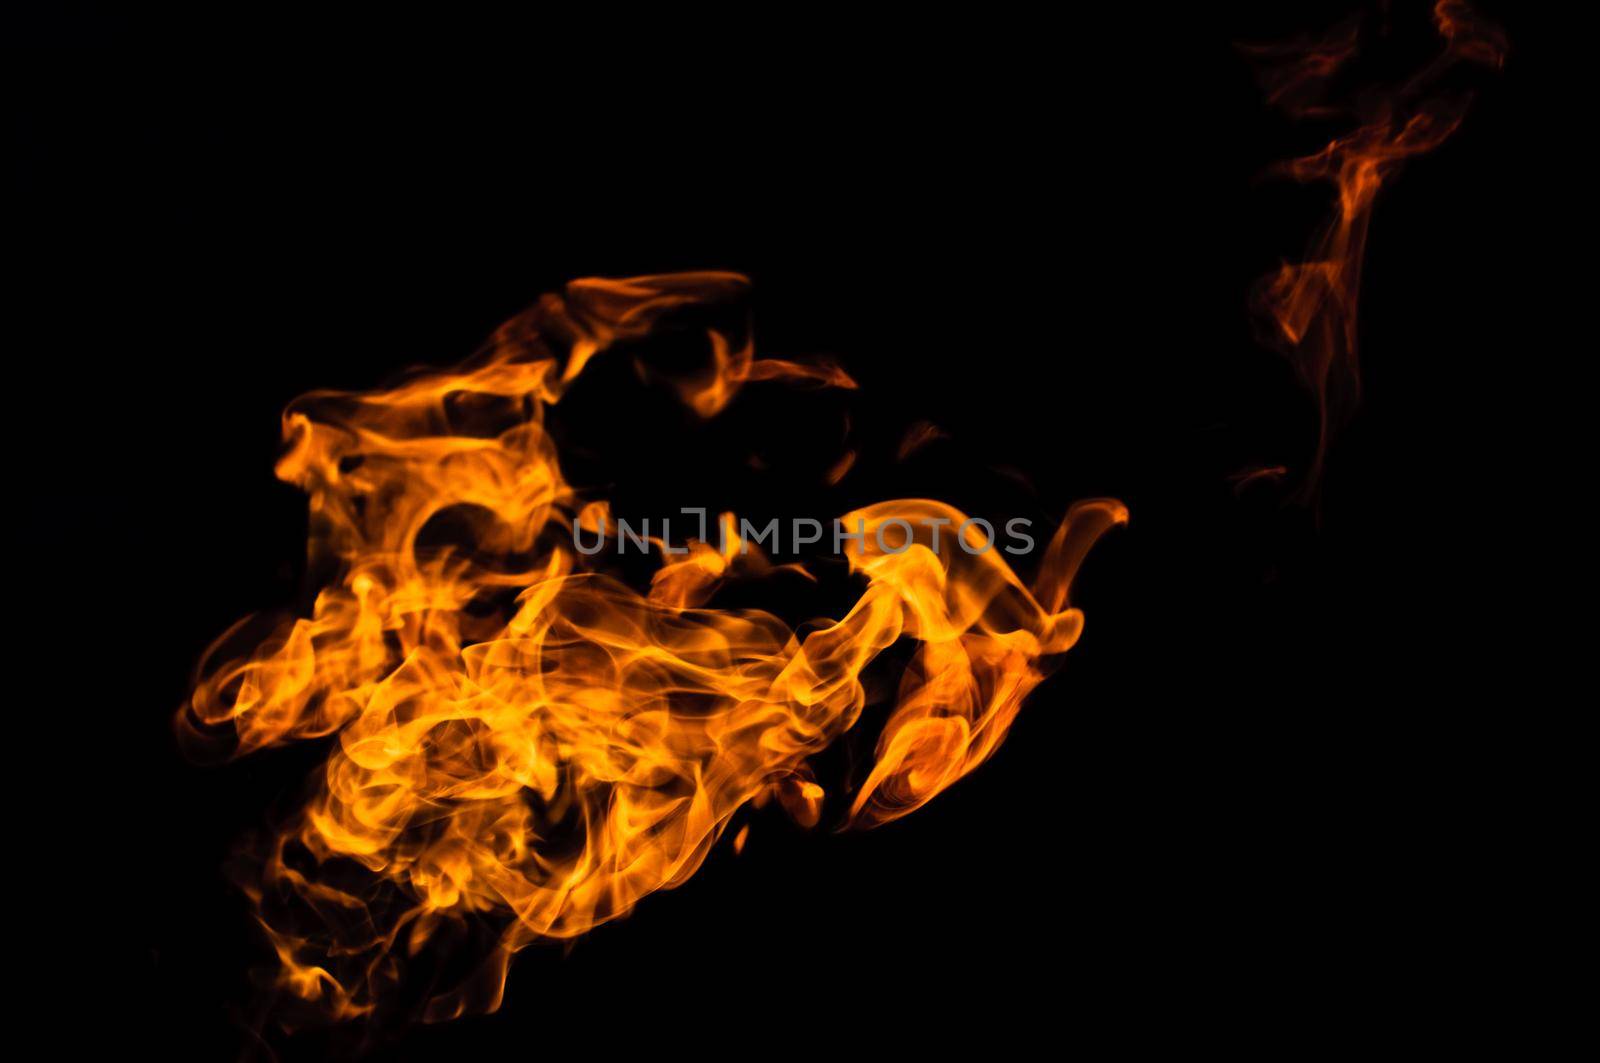 tongue of the flame over black background